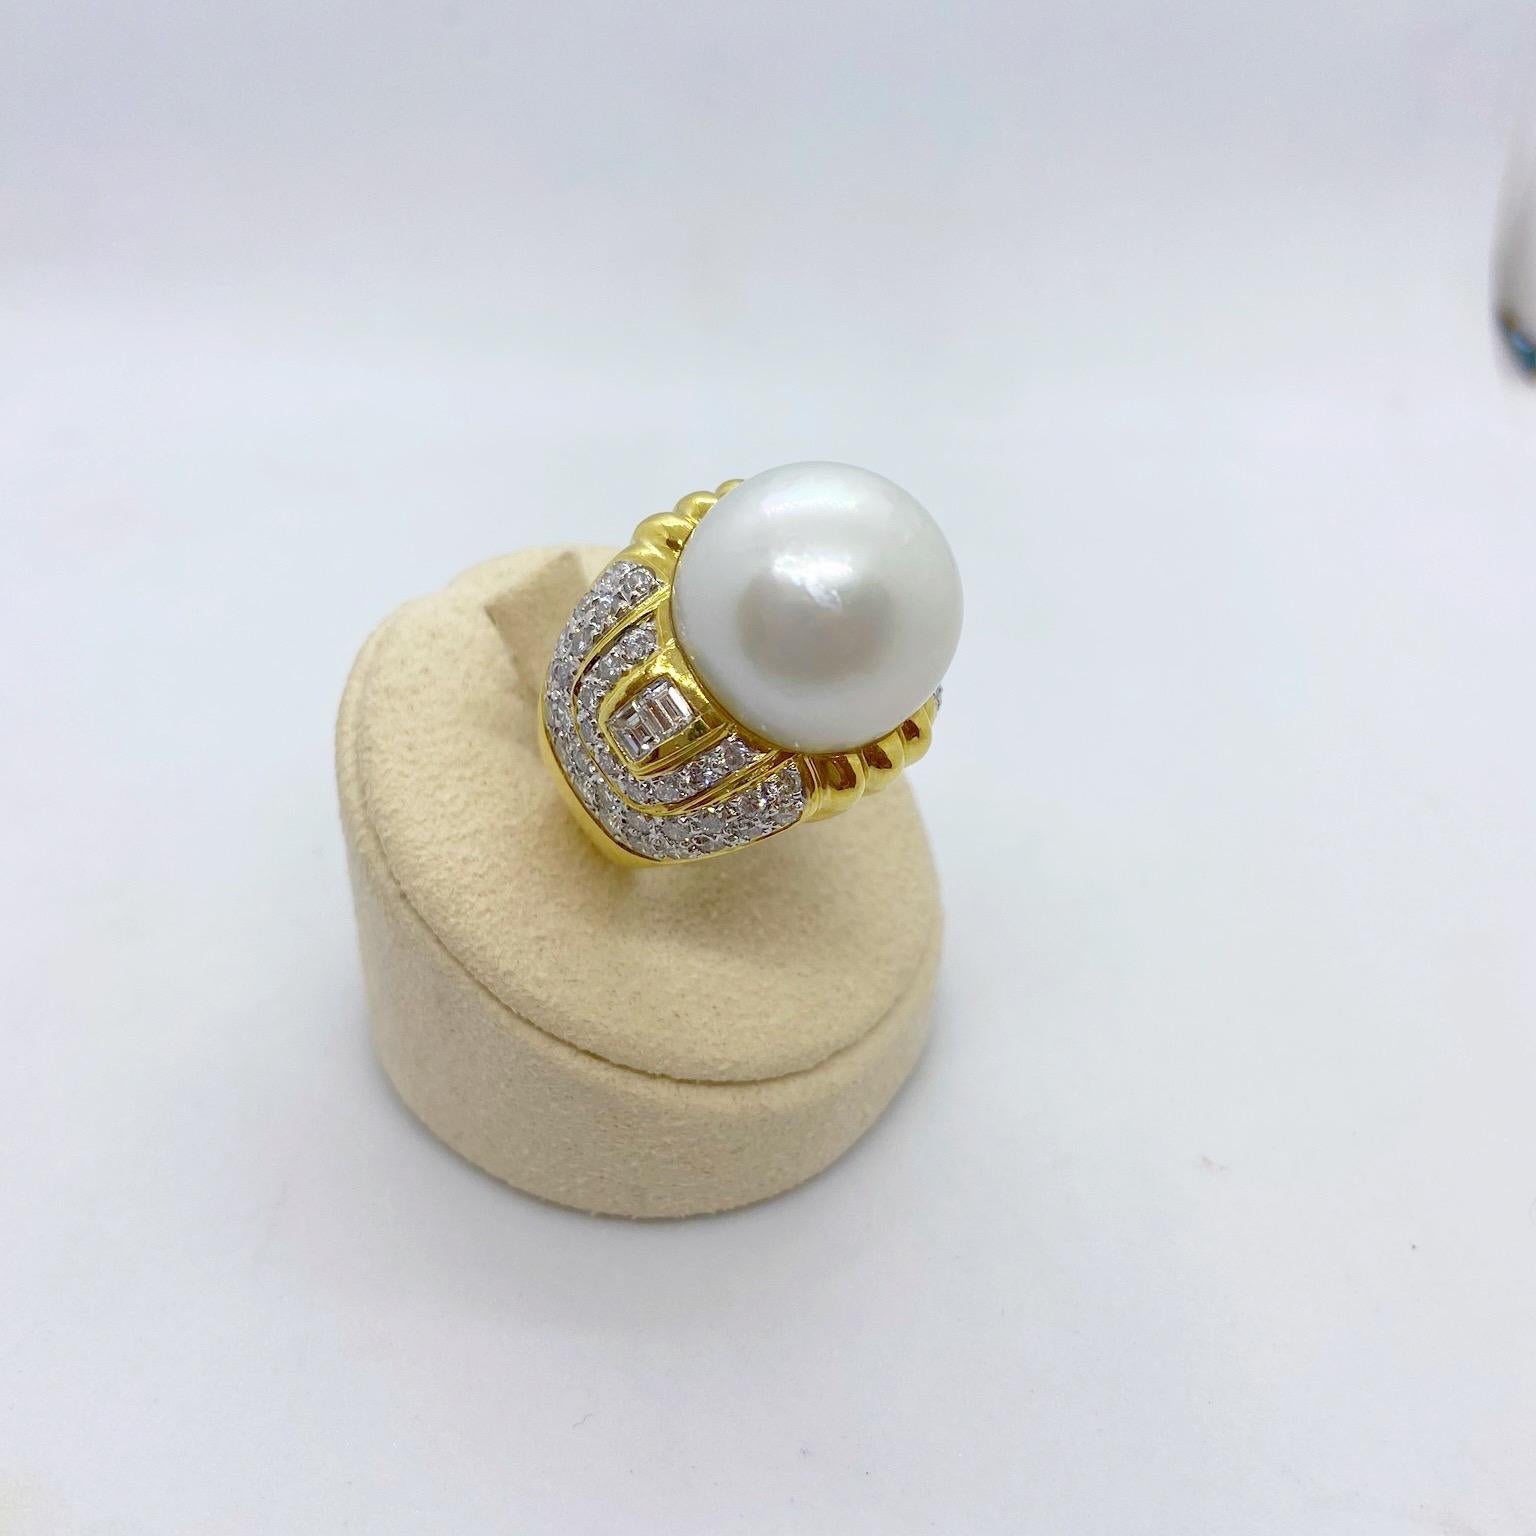 Designed by Cellini Jewelers NYC, This 18 Karat Yellow Gold Deco Inspired Ring features a stunning 16.5MM South Sea Pearl center. The Pearl is flanked with bezel set Emerald cut diamonds, and is surrounded entirely with round brilliants which are